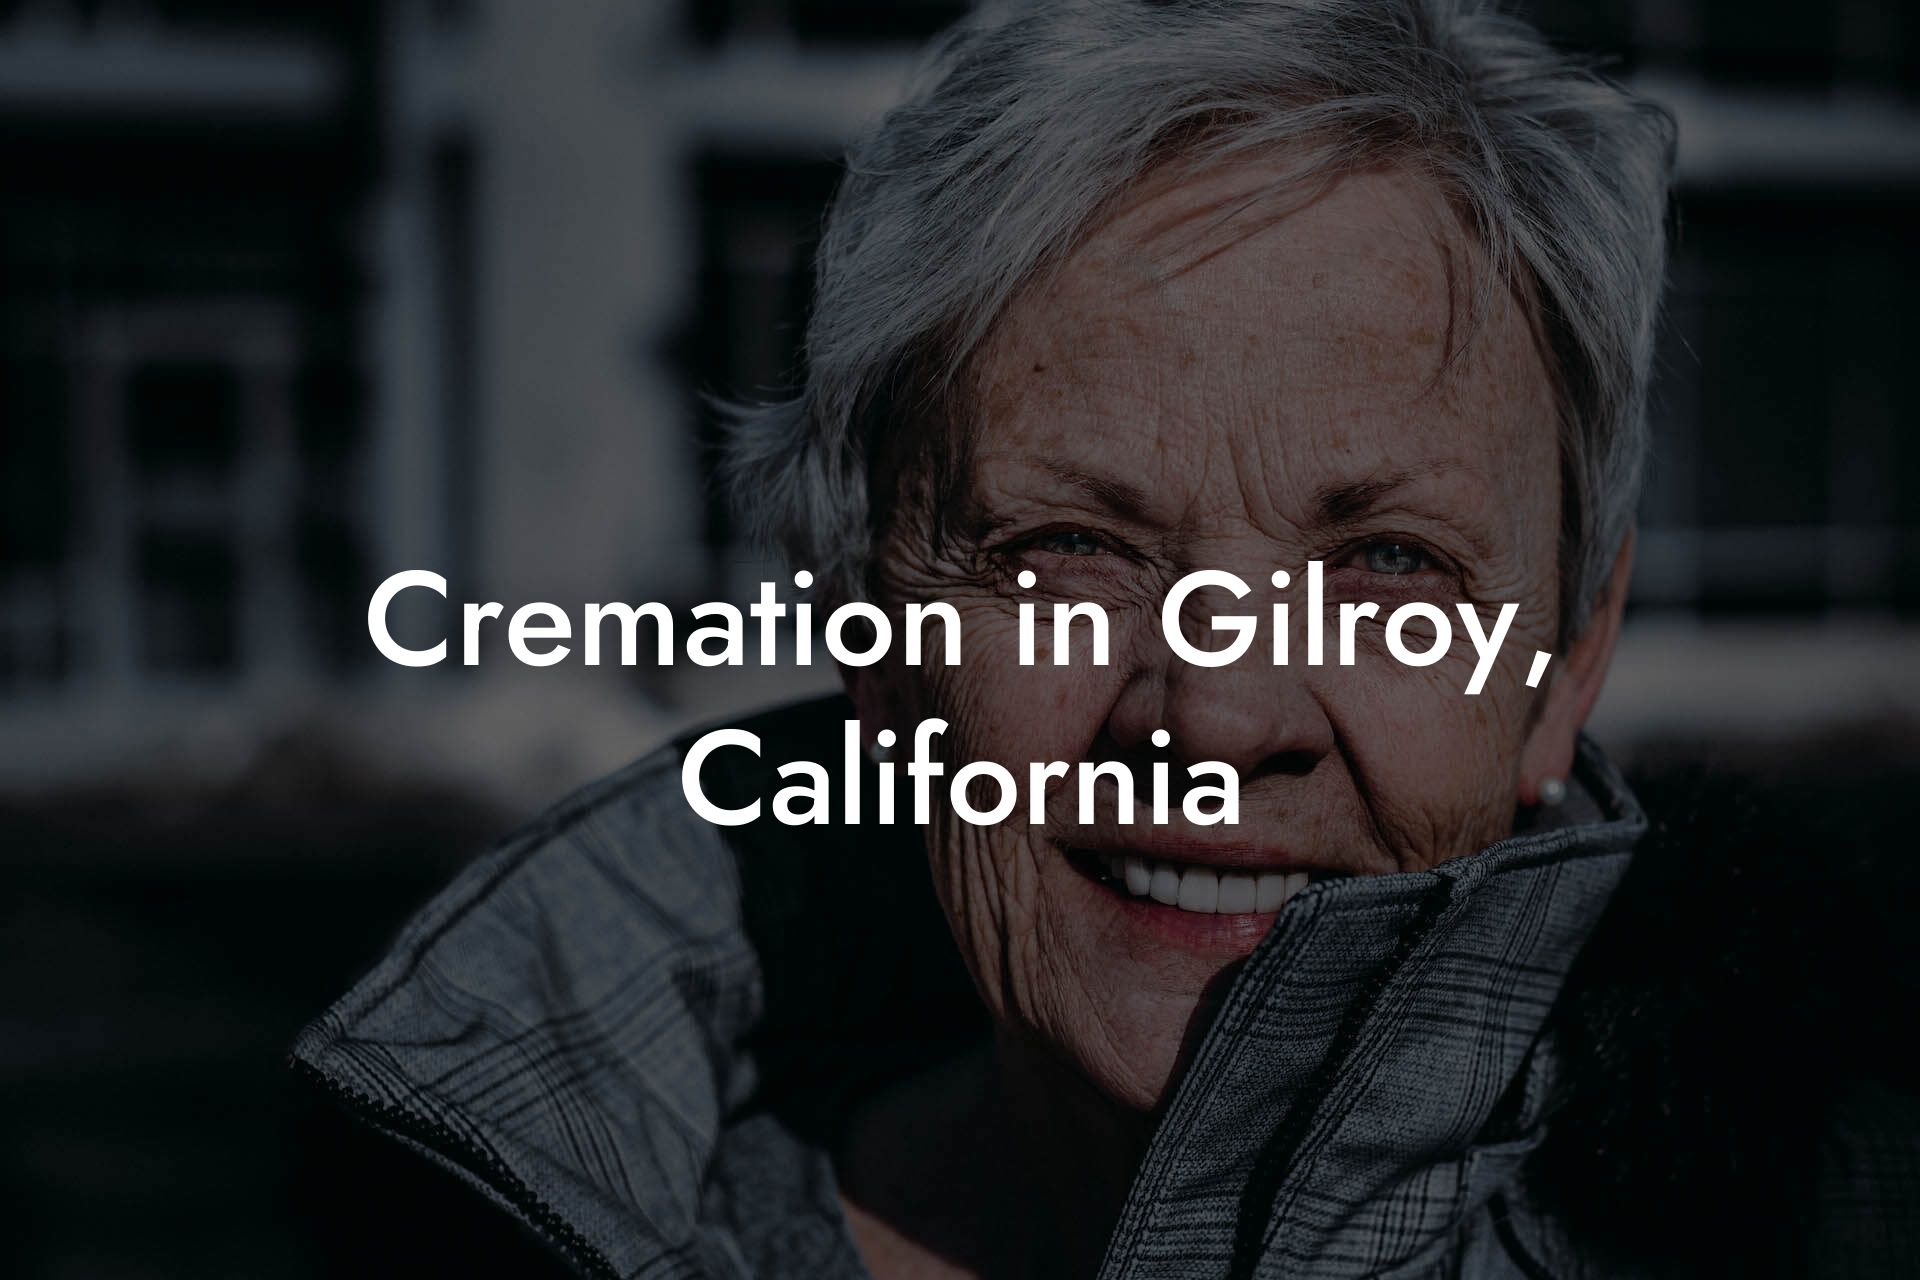 Cremation in Gilroy, California